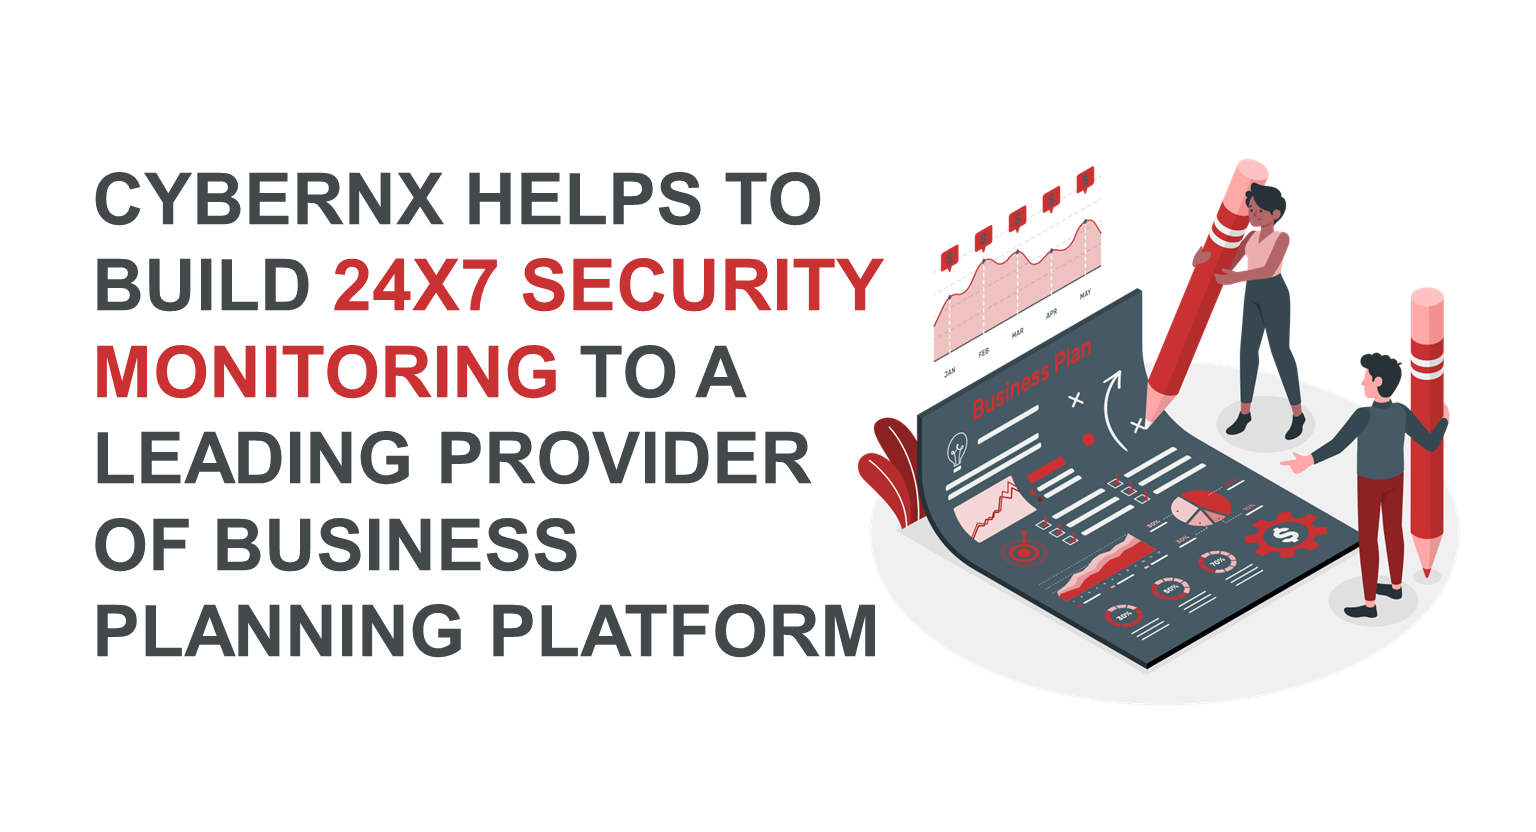 CyberNX helps to build 24x7 security Monitoring to a Leading Provider of Business Planning Platform